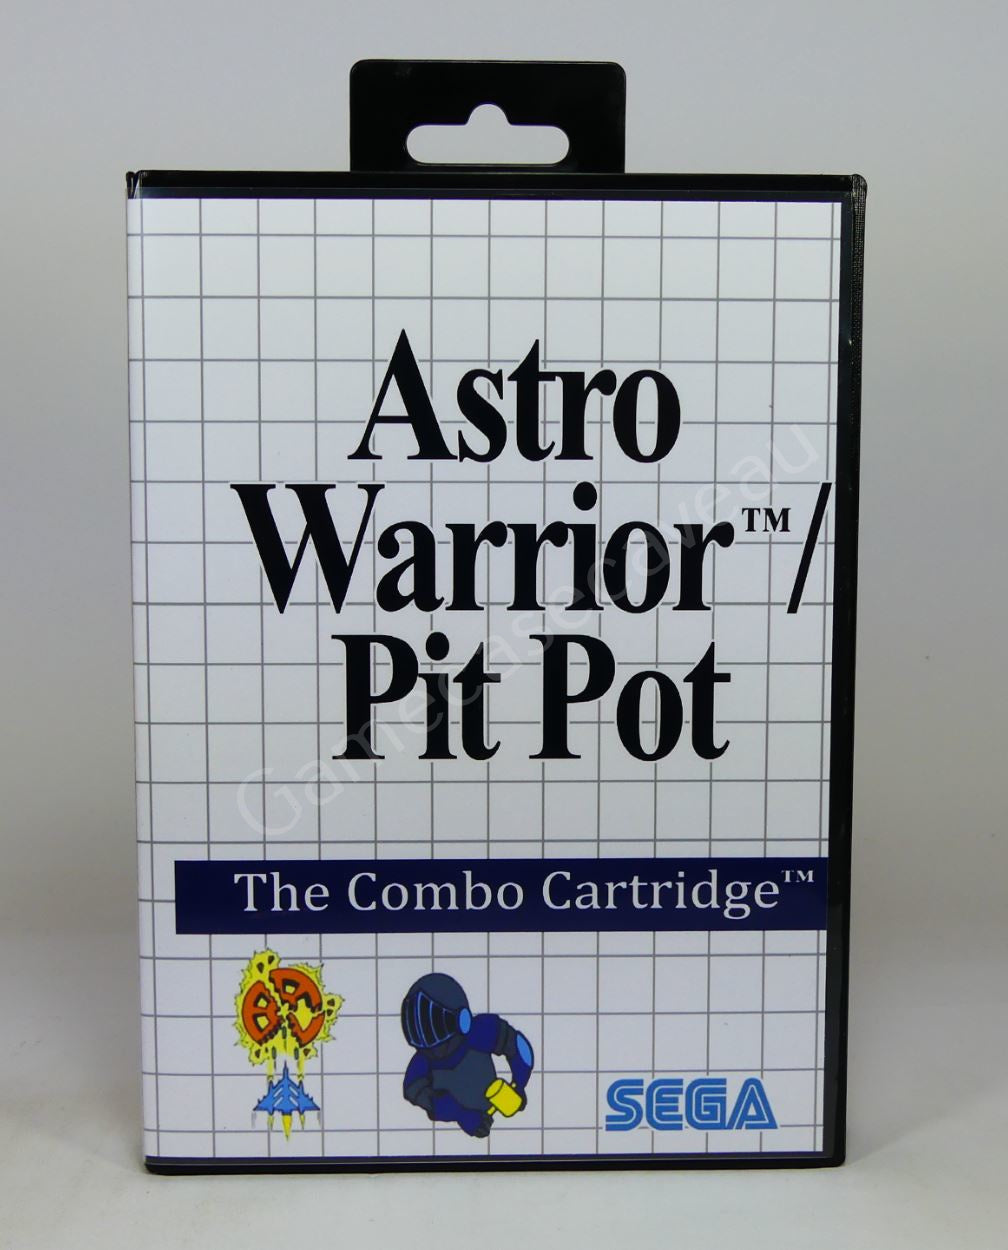 Astro Warrior/Pit Pot - SMS Replacement Case